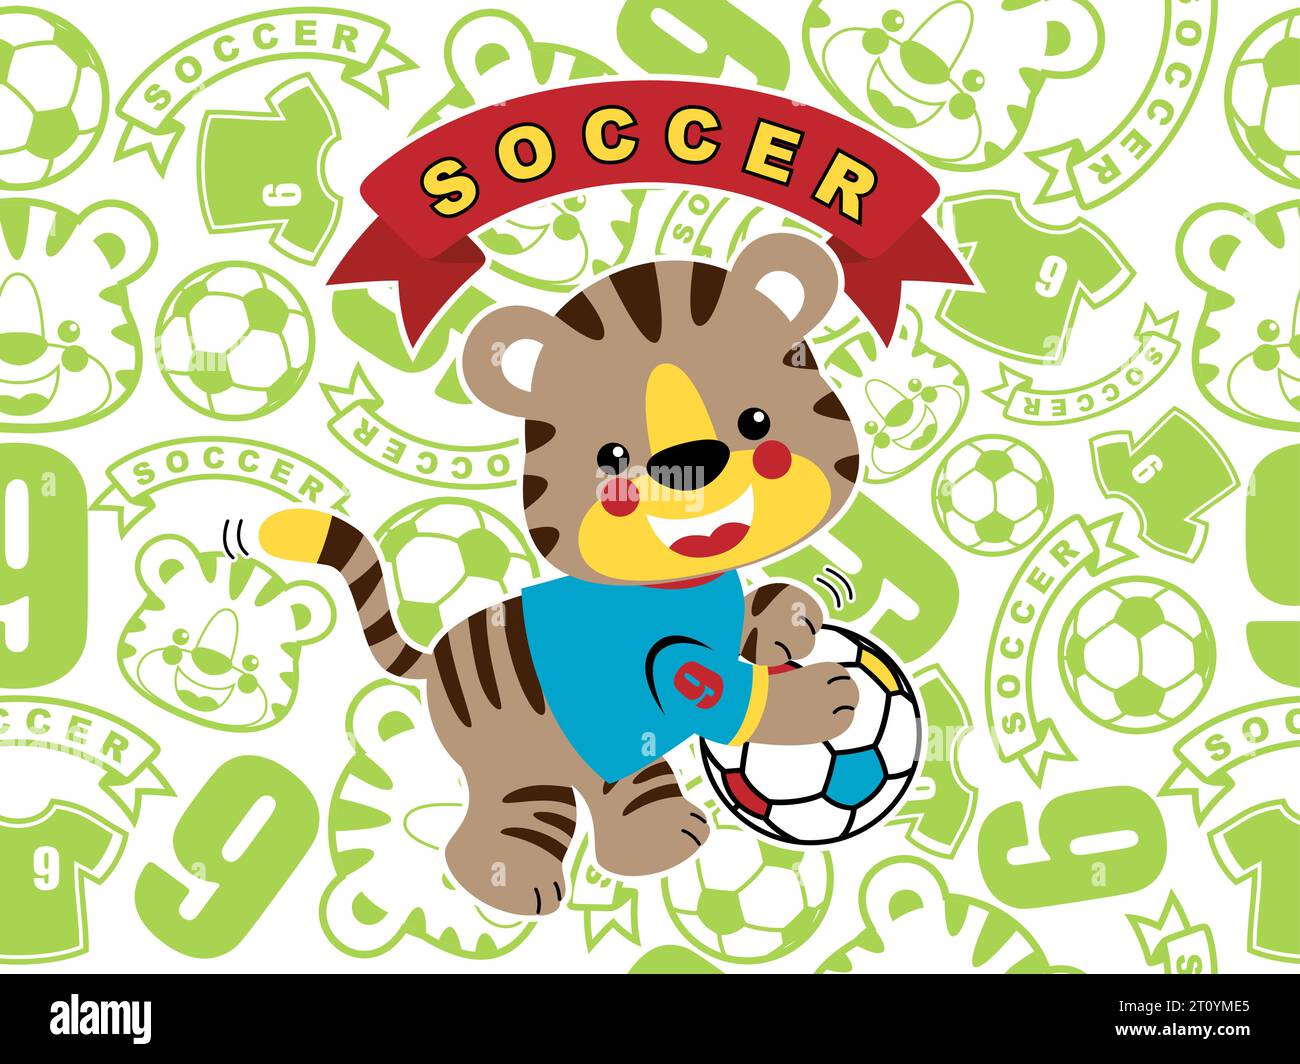 Funny little tiger holding ball on seamless pattern background of soccer elements and tiger smiling face. Vector cartoon illustration Stock Vector